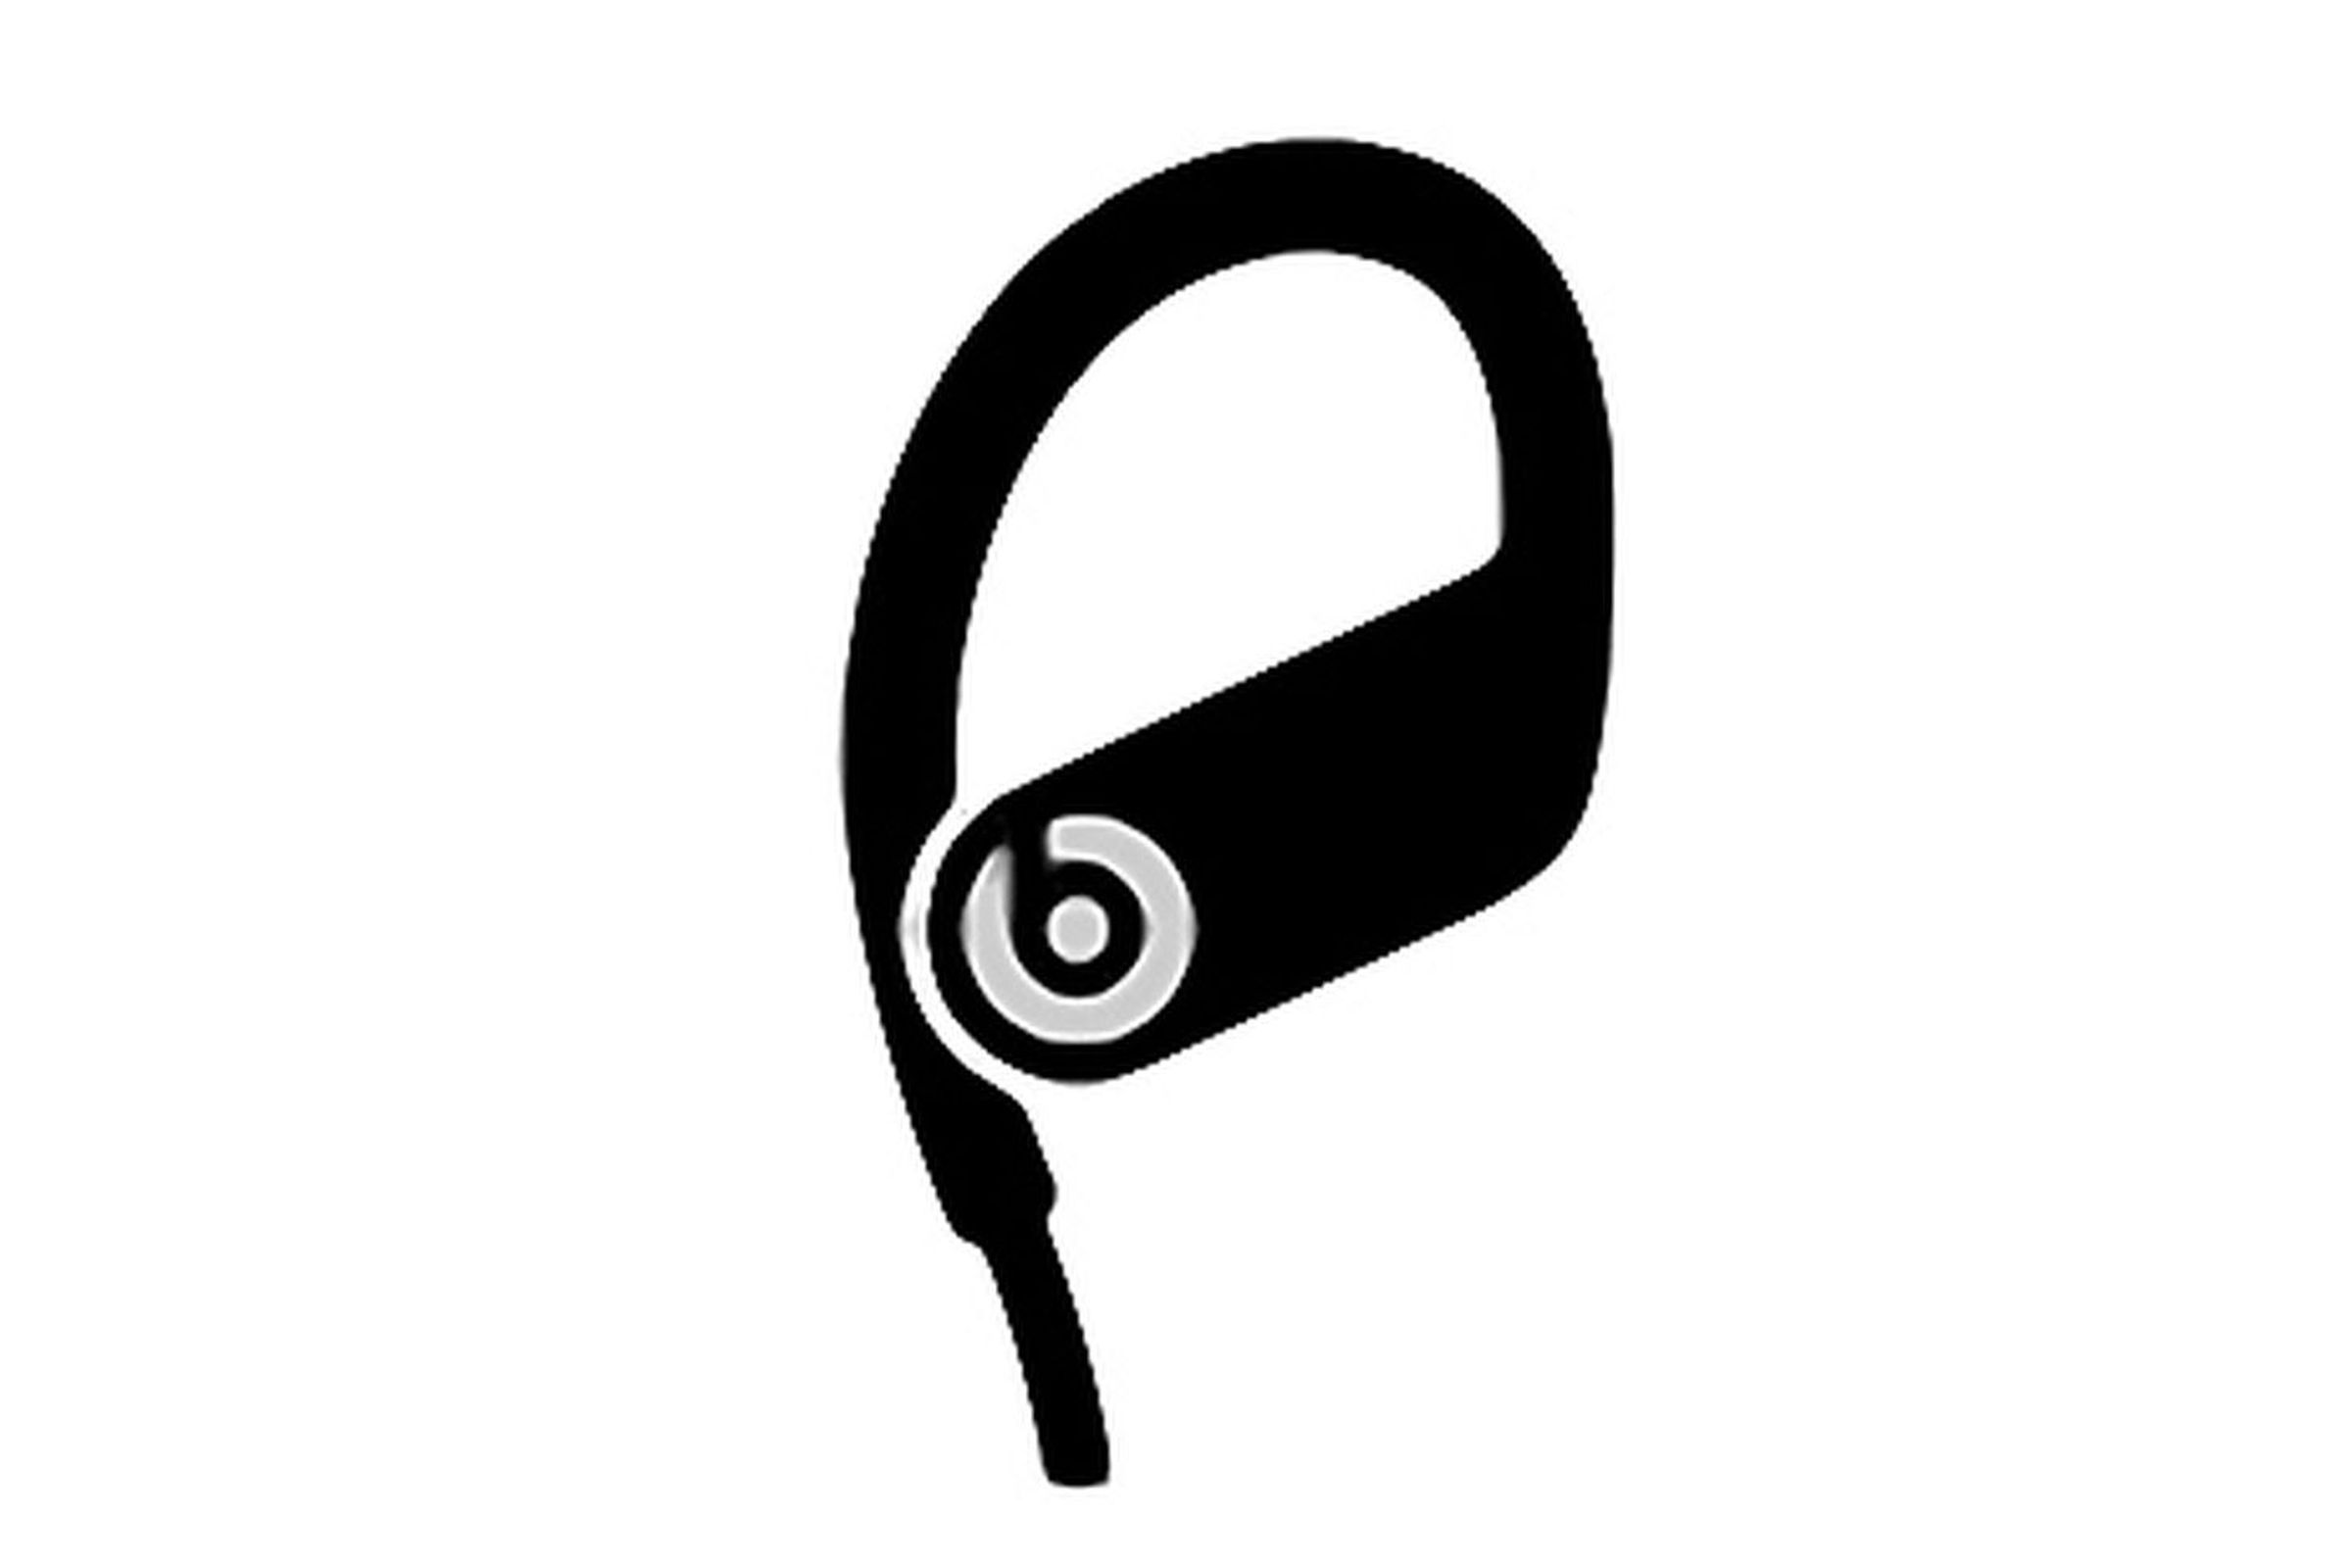 The icon shows the headphones with a cable attached to their rear rather than their front.